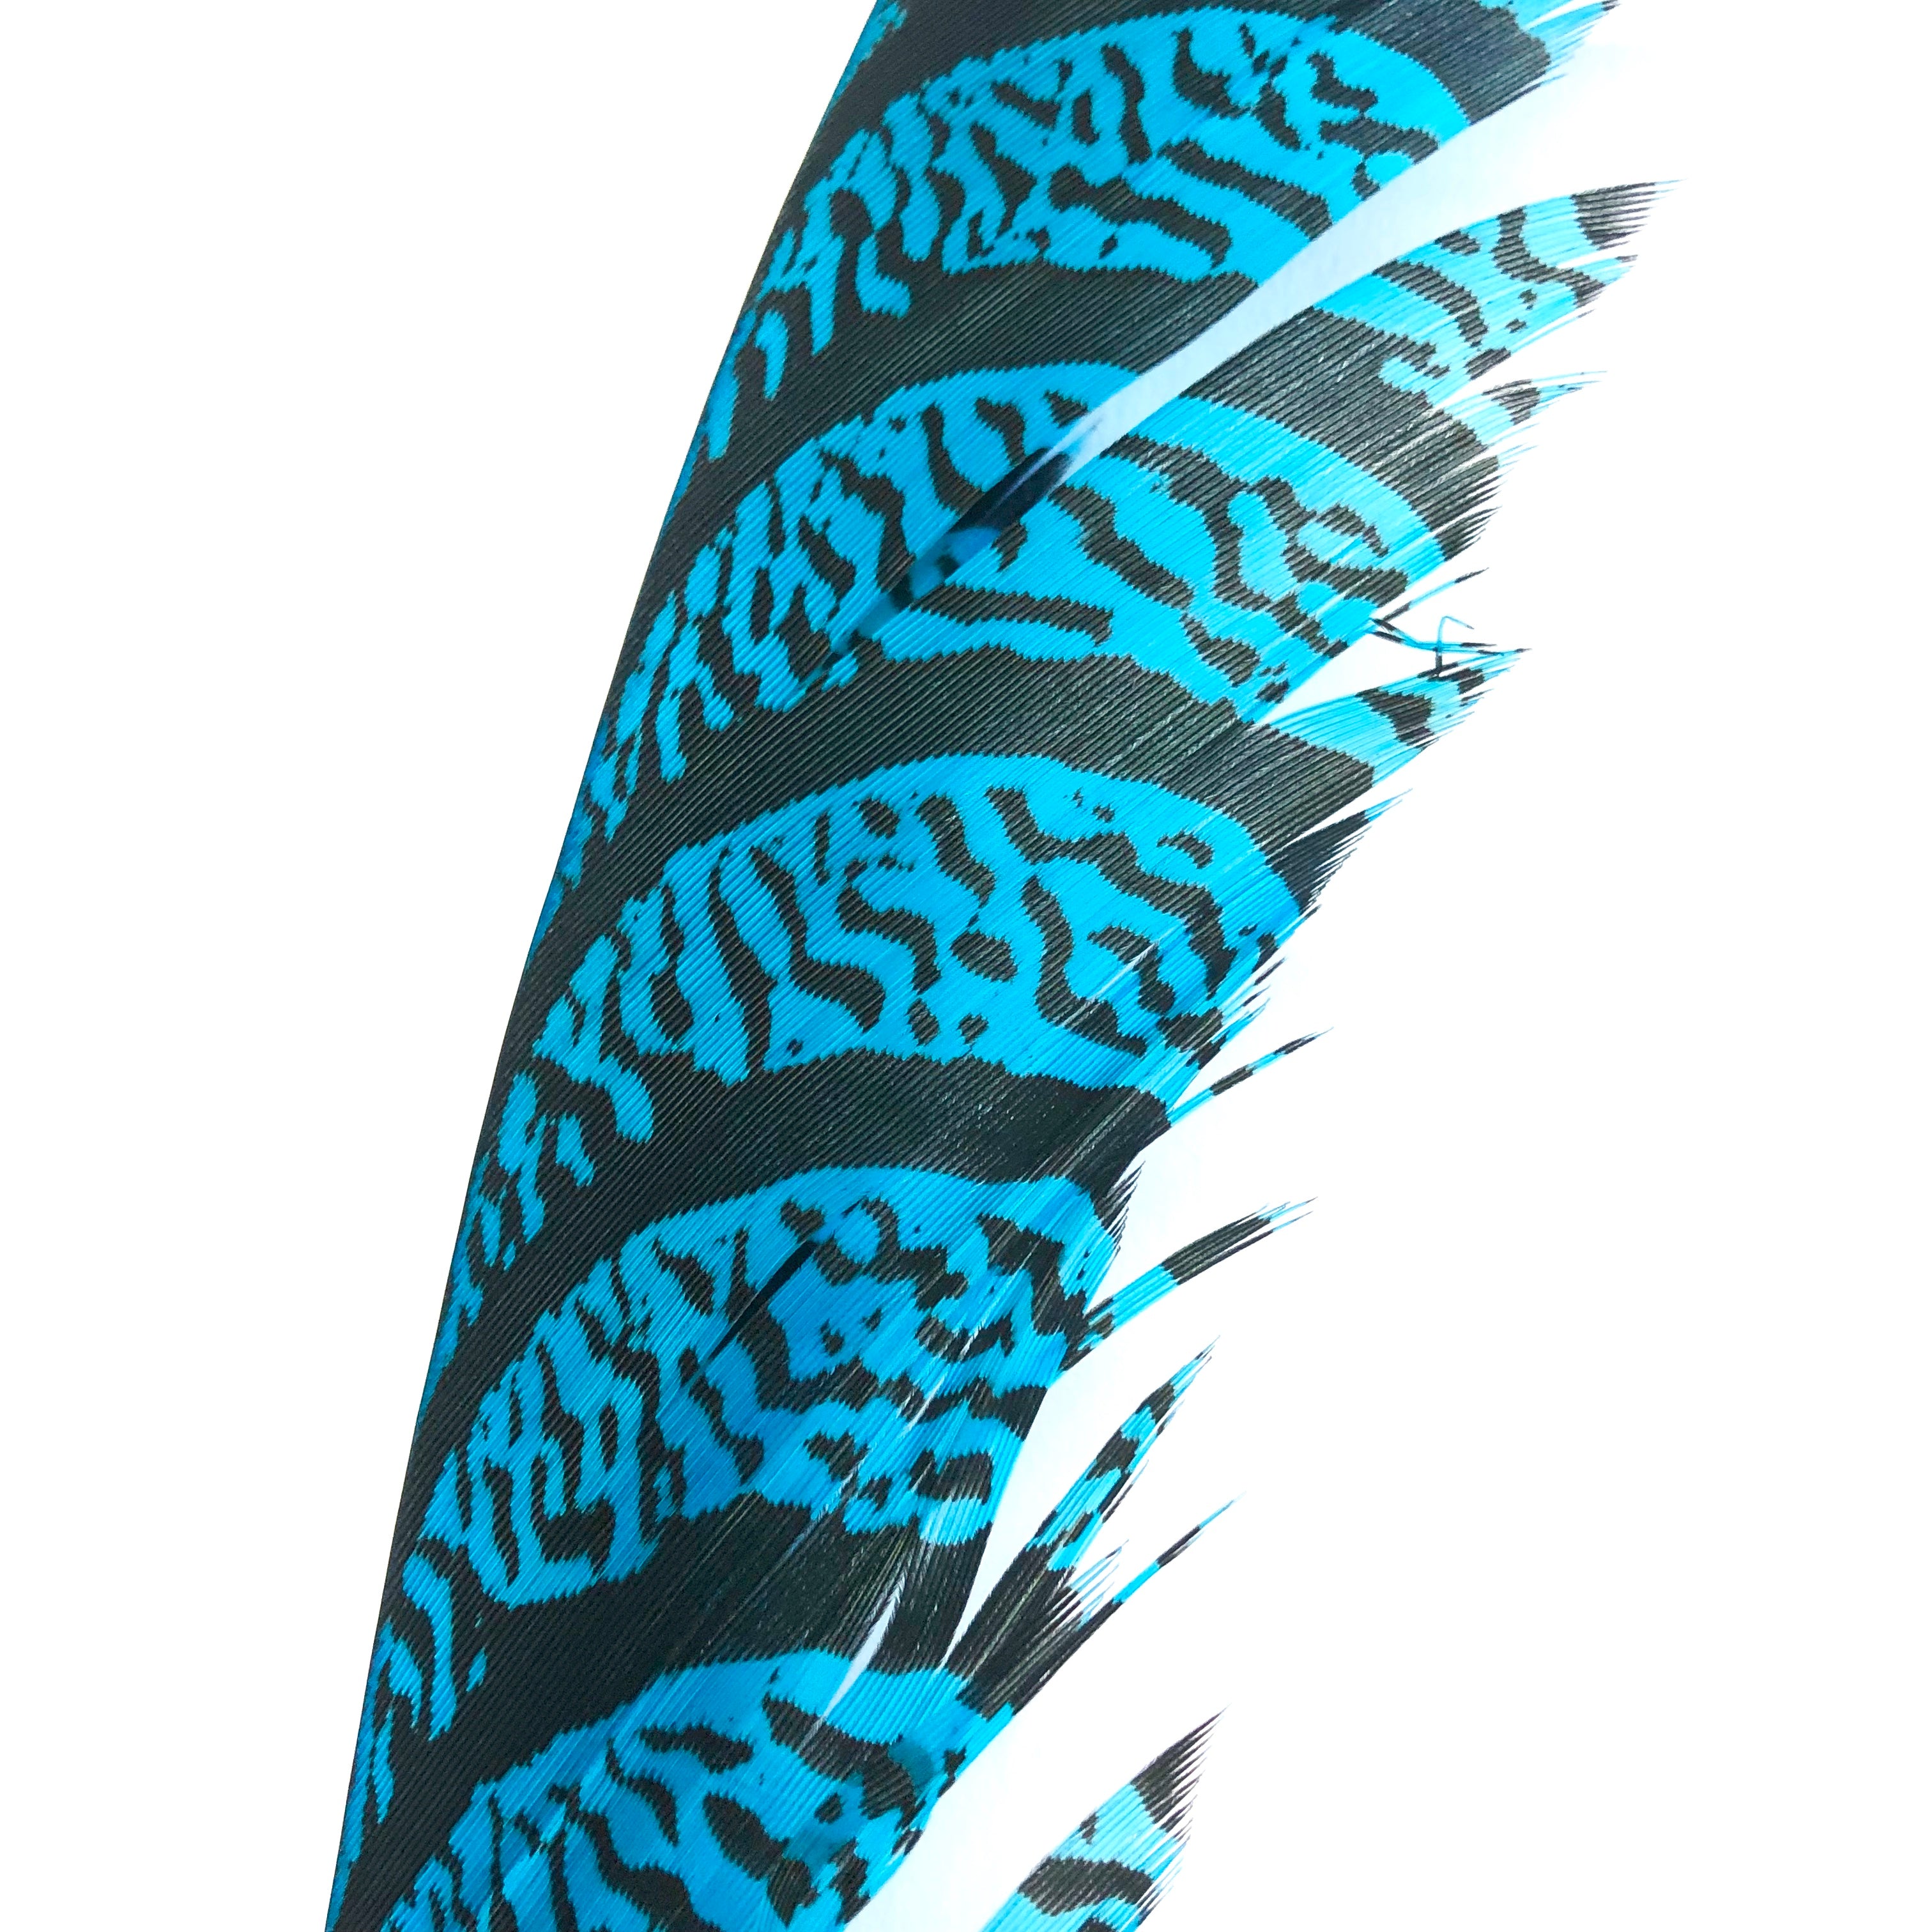 Lady Amherst Pheasant Centre Tail Feather - Turquoise